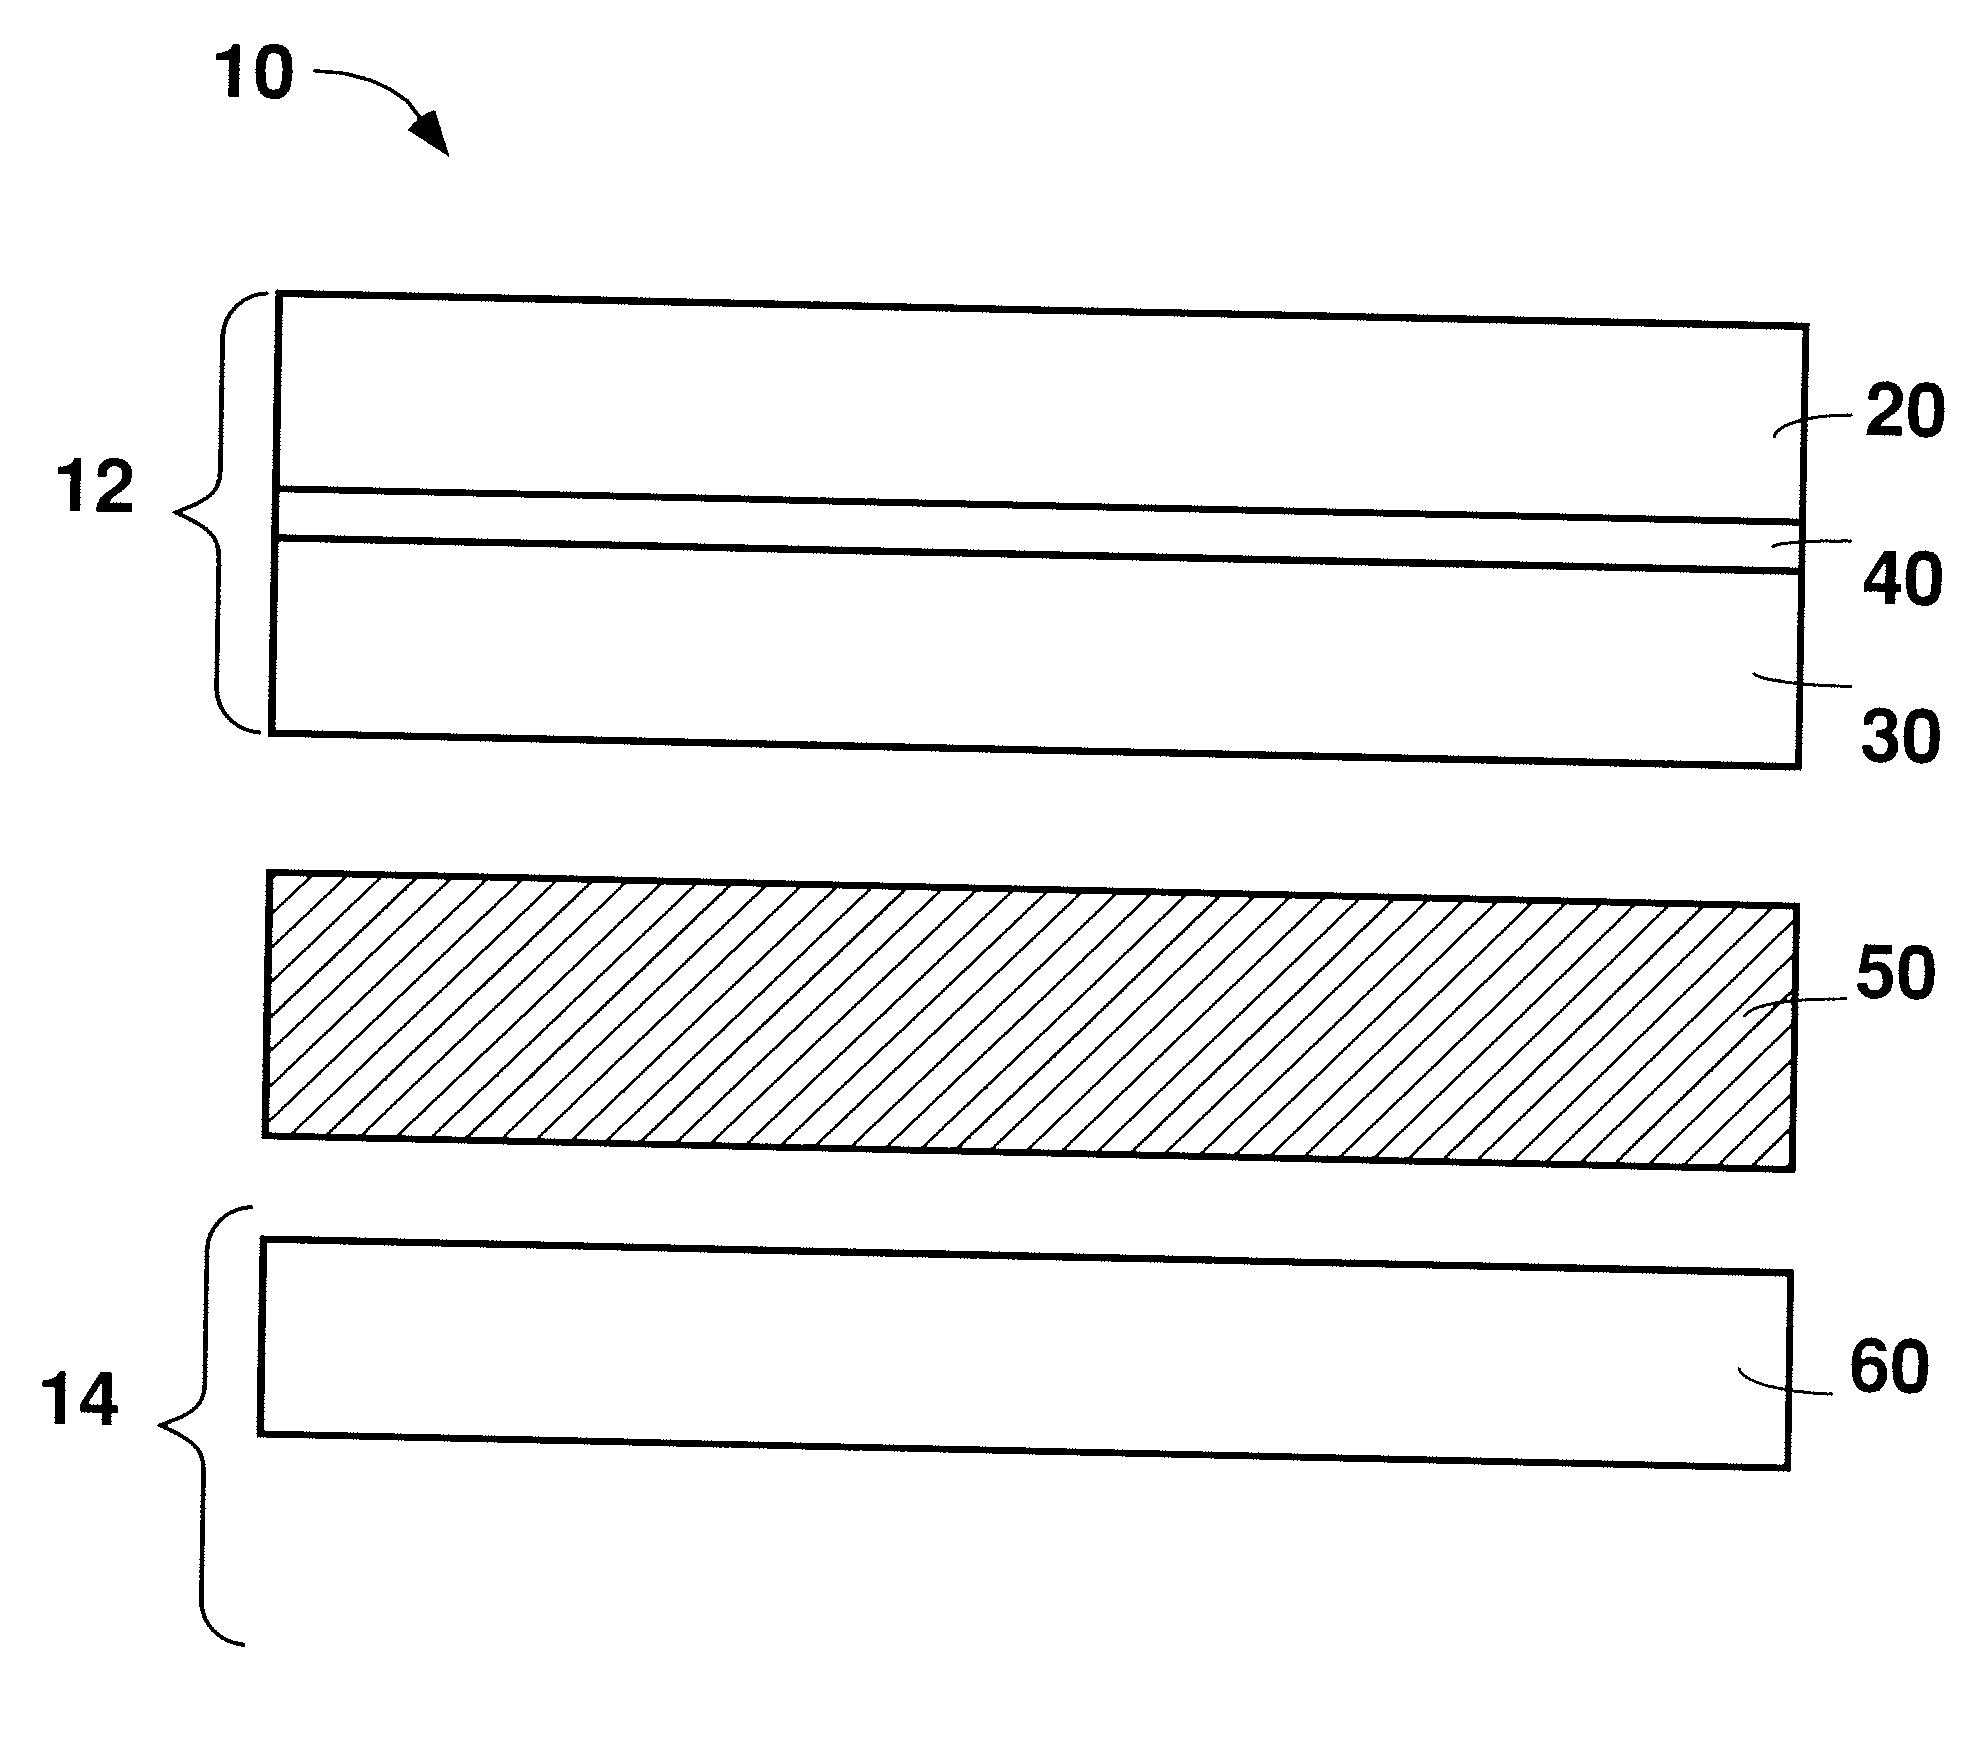 Method for reducing formation of electrically resistive layer on ferritic stainless steels